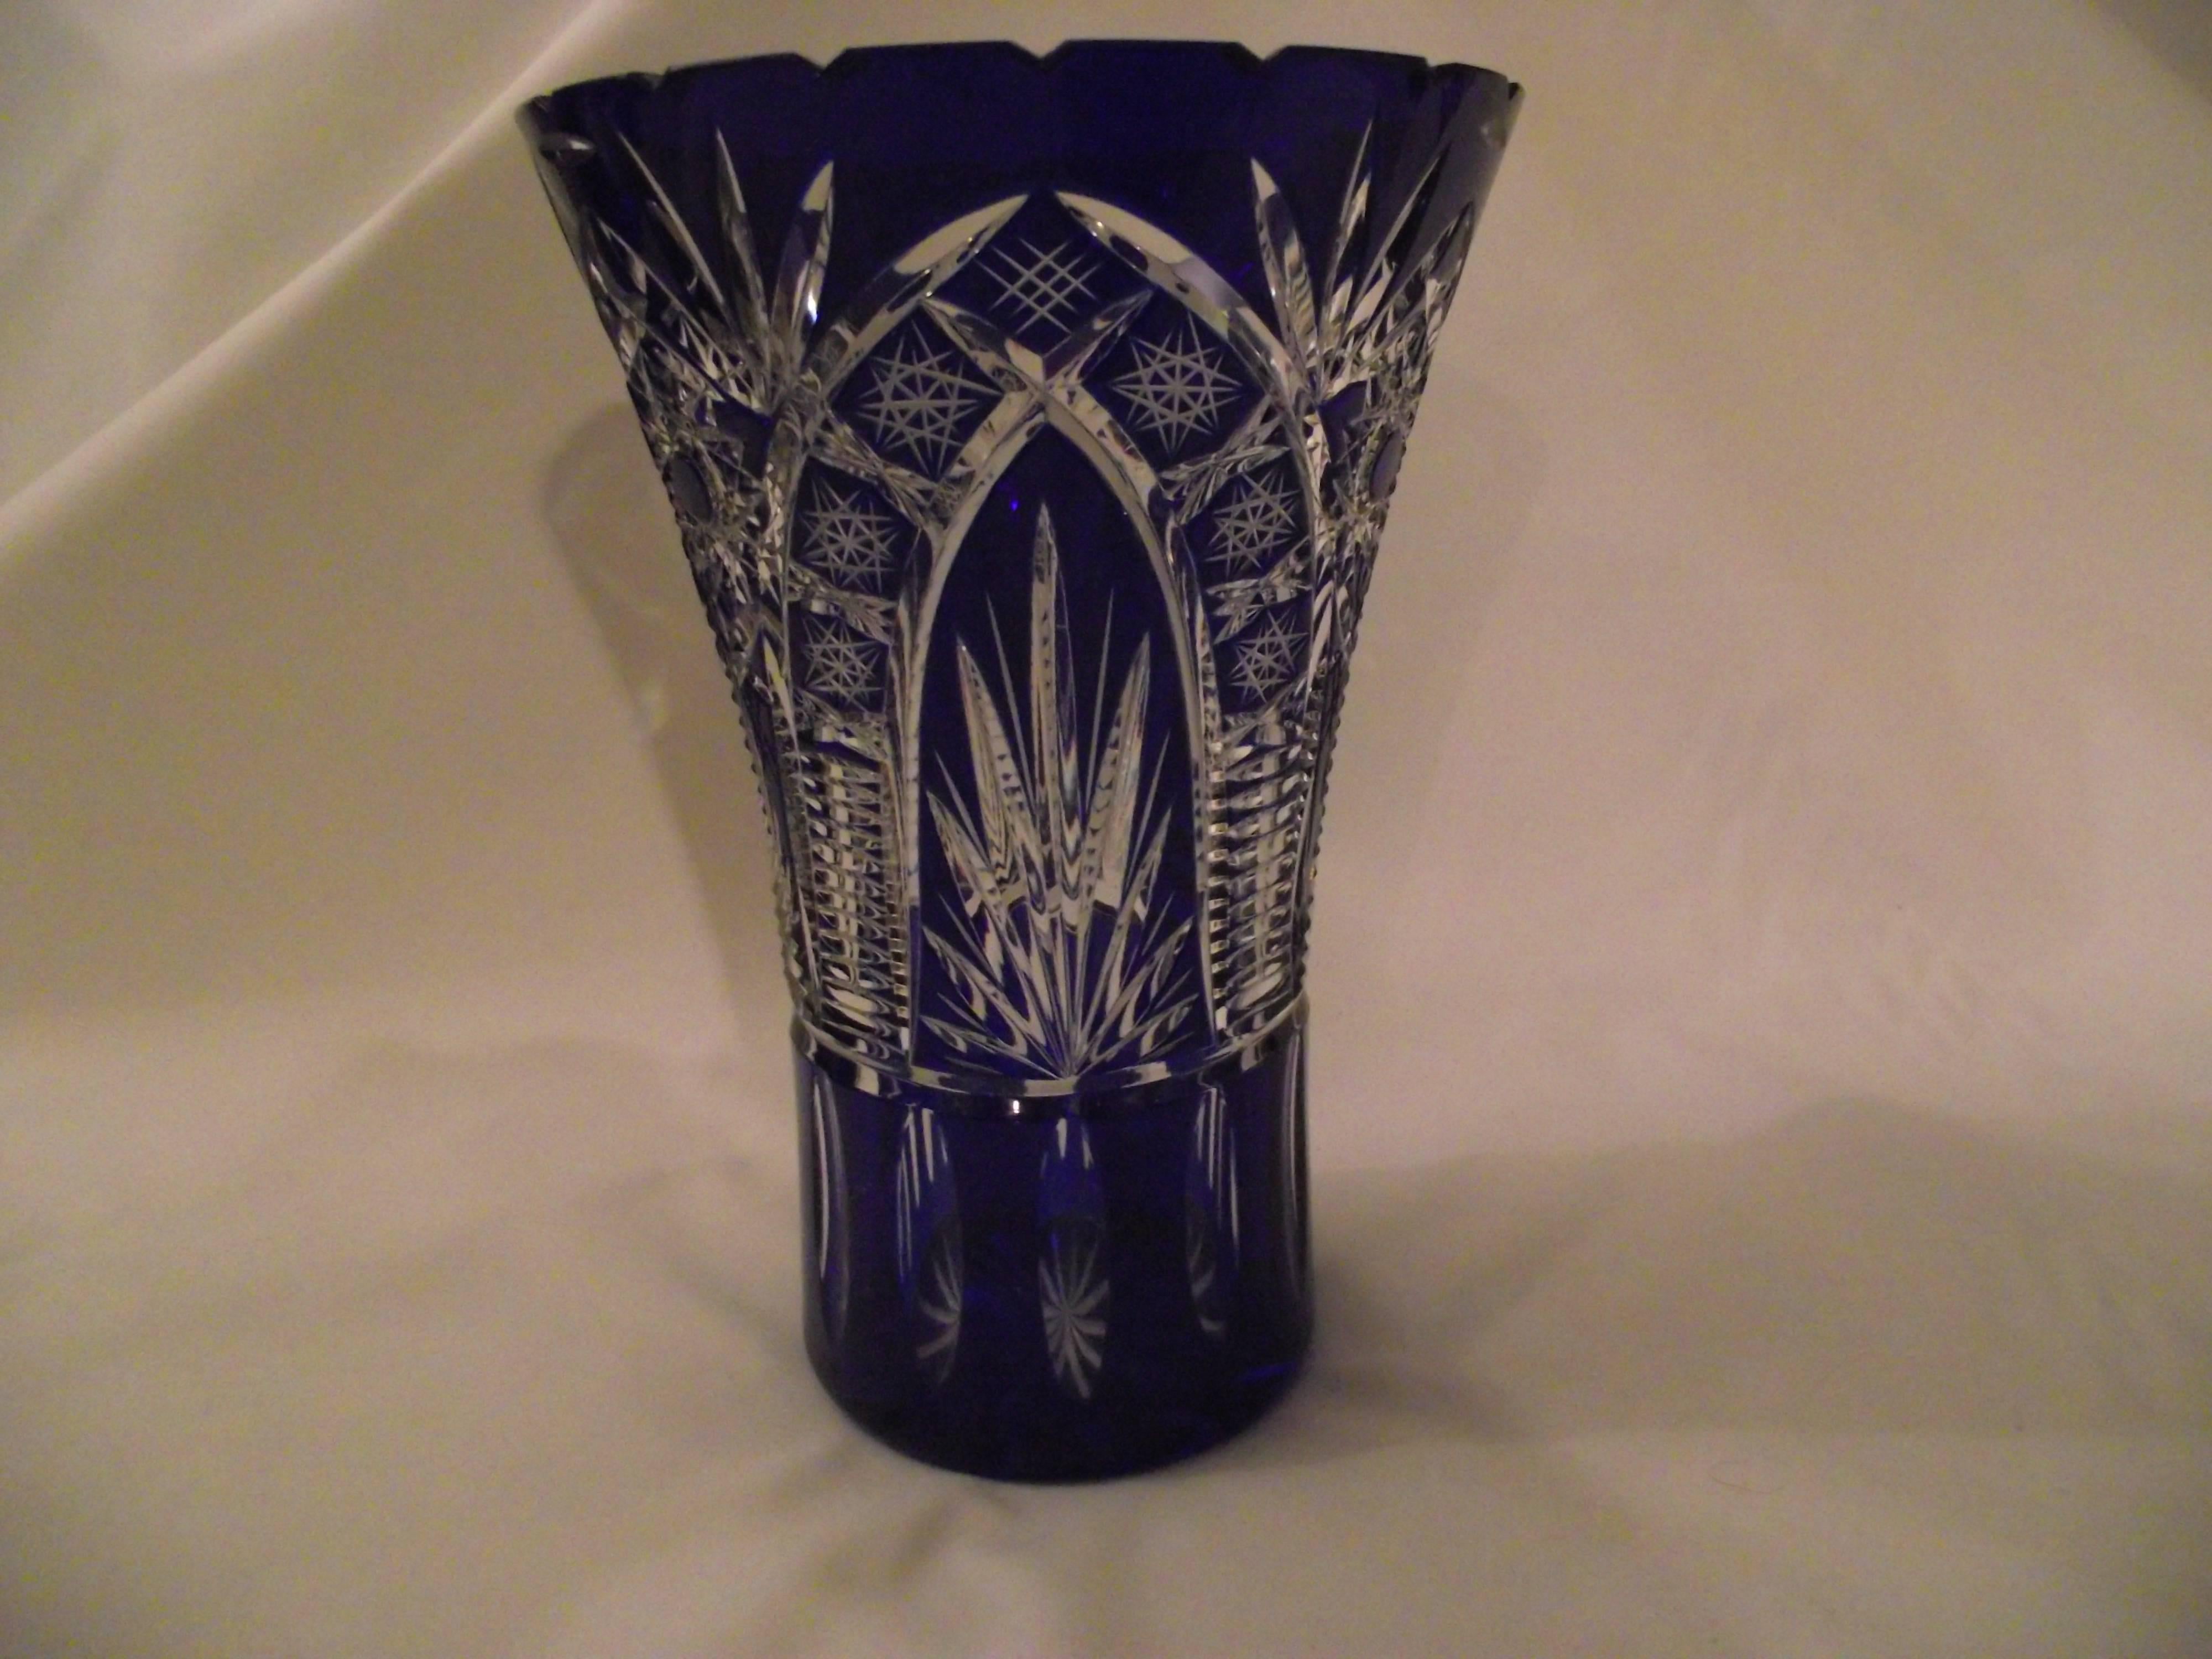 This large cut crystal vase is heavy enough to hold large flower arrangements. It is in perfect condition.